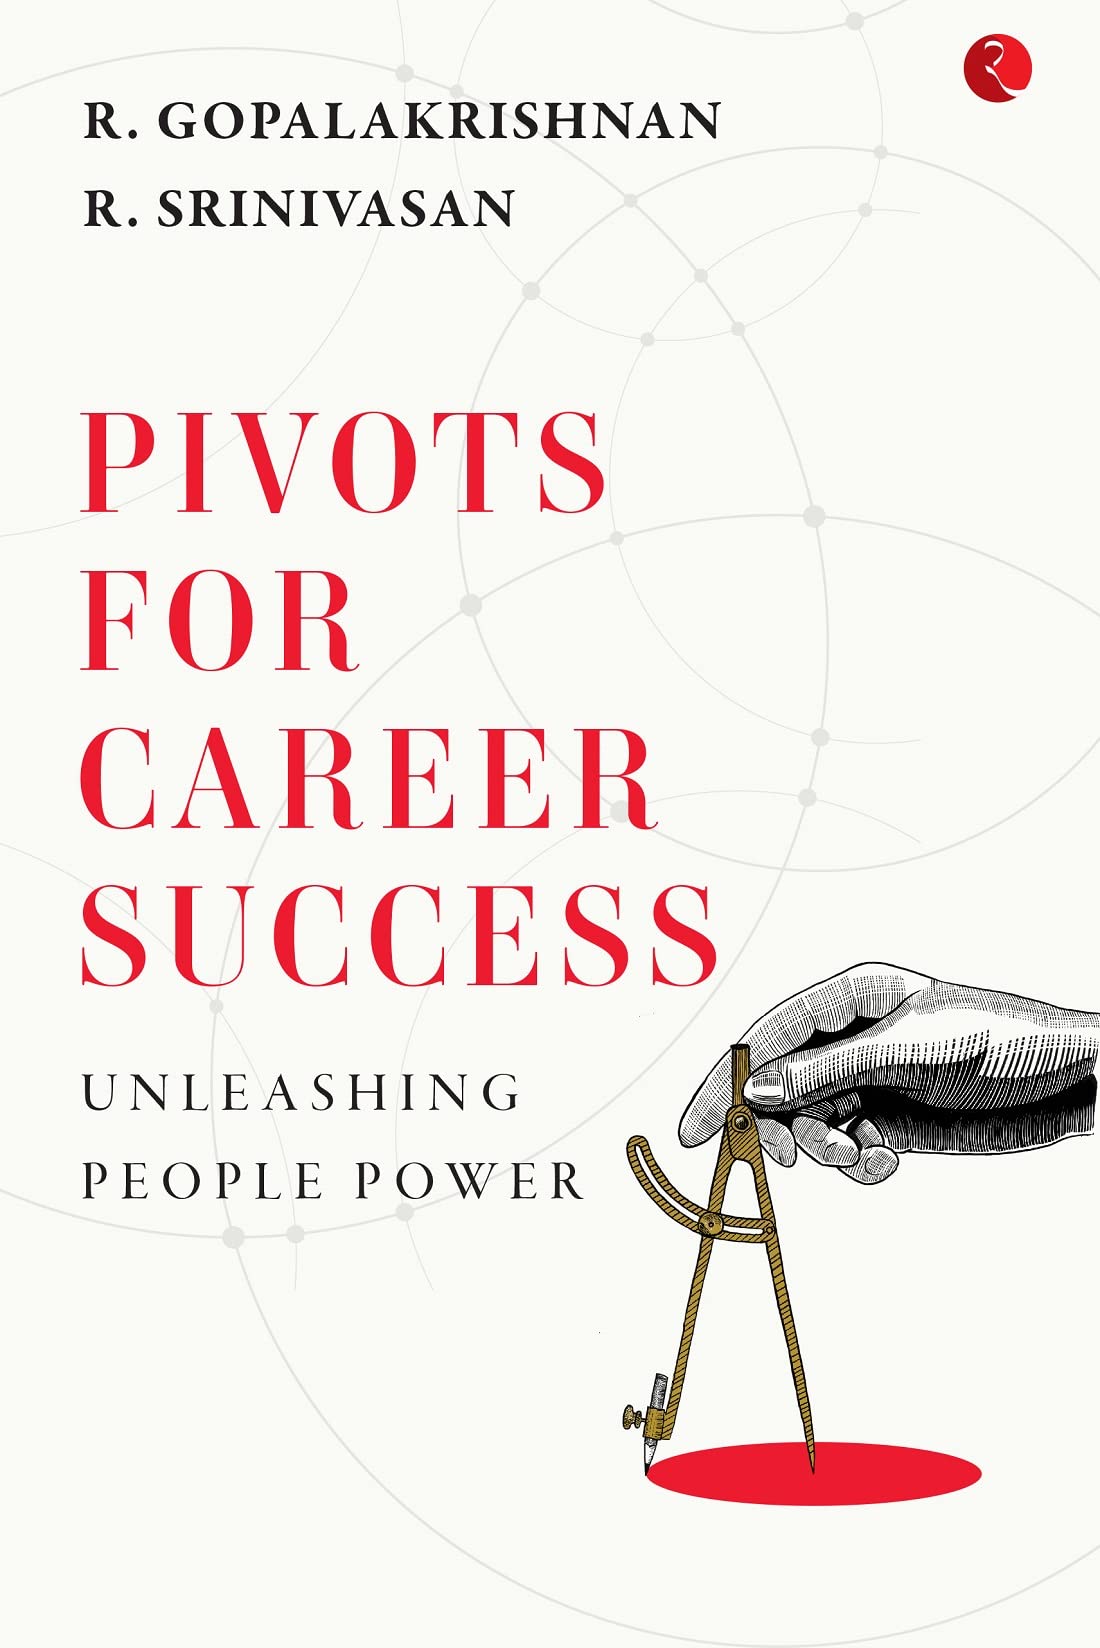 PIVOTS FOR CAREER SUCCESS: UNLEASHING PEOPLE POWER